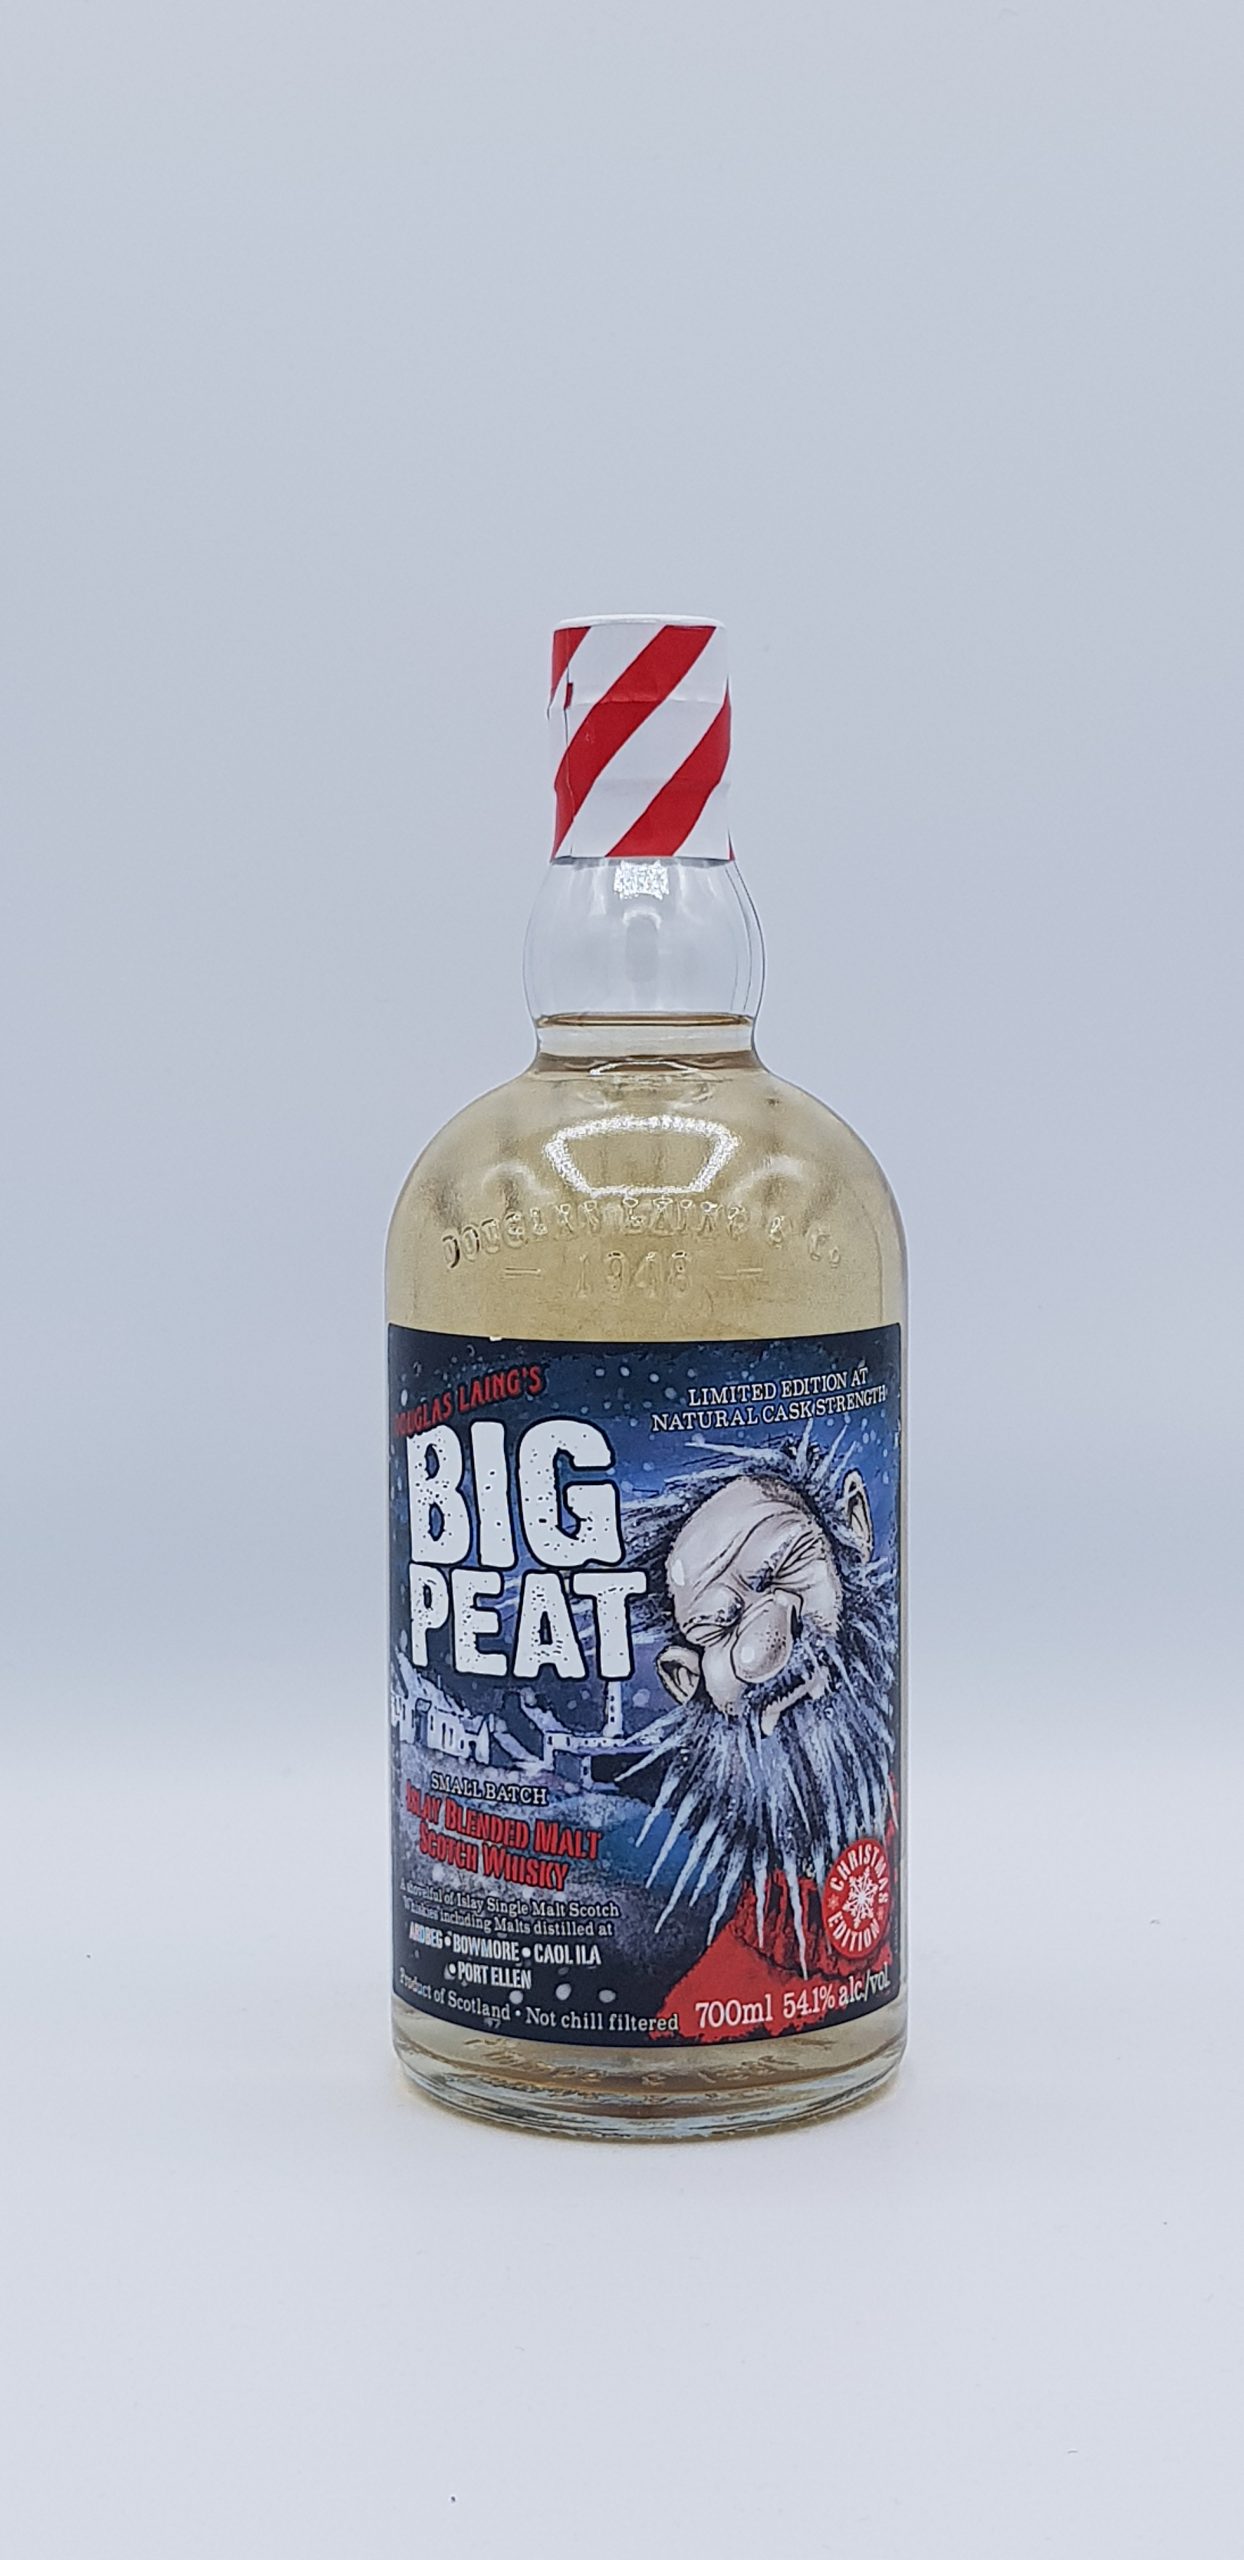 Whisky Big Peat Islay blended Christmas Edition